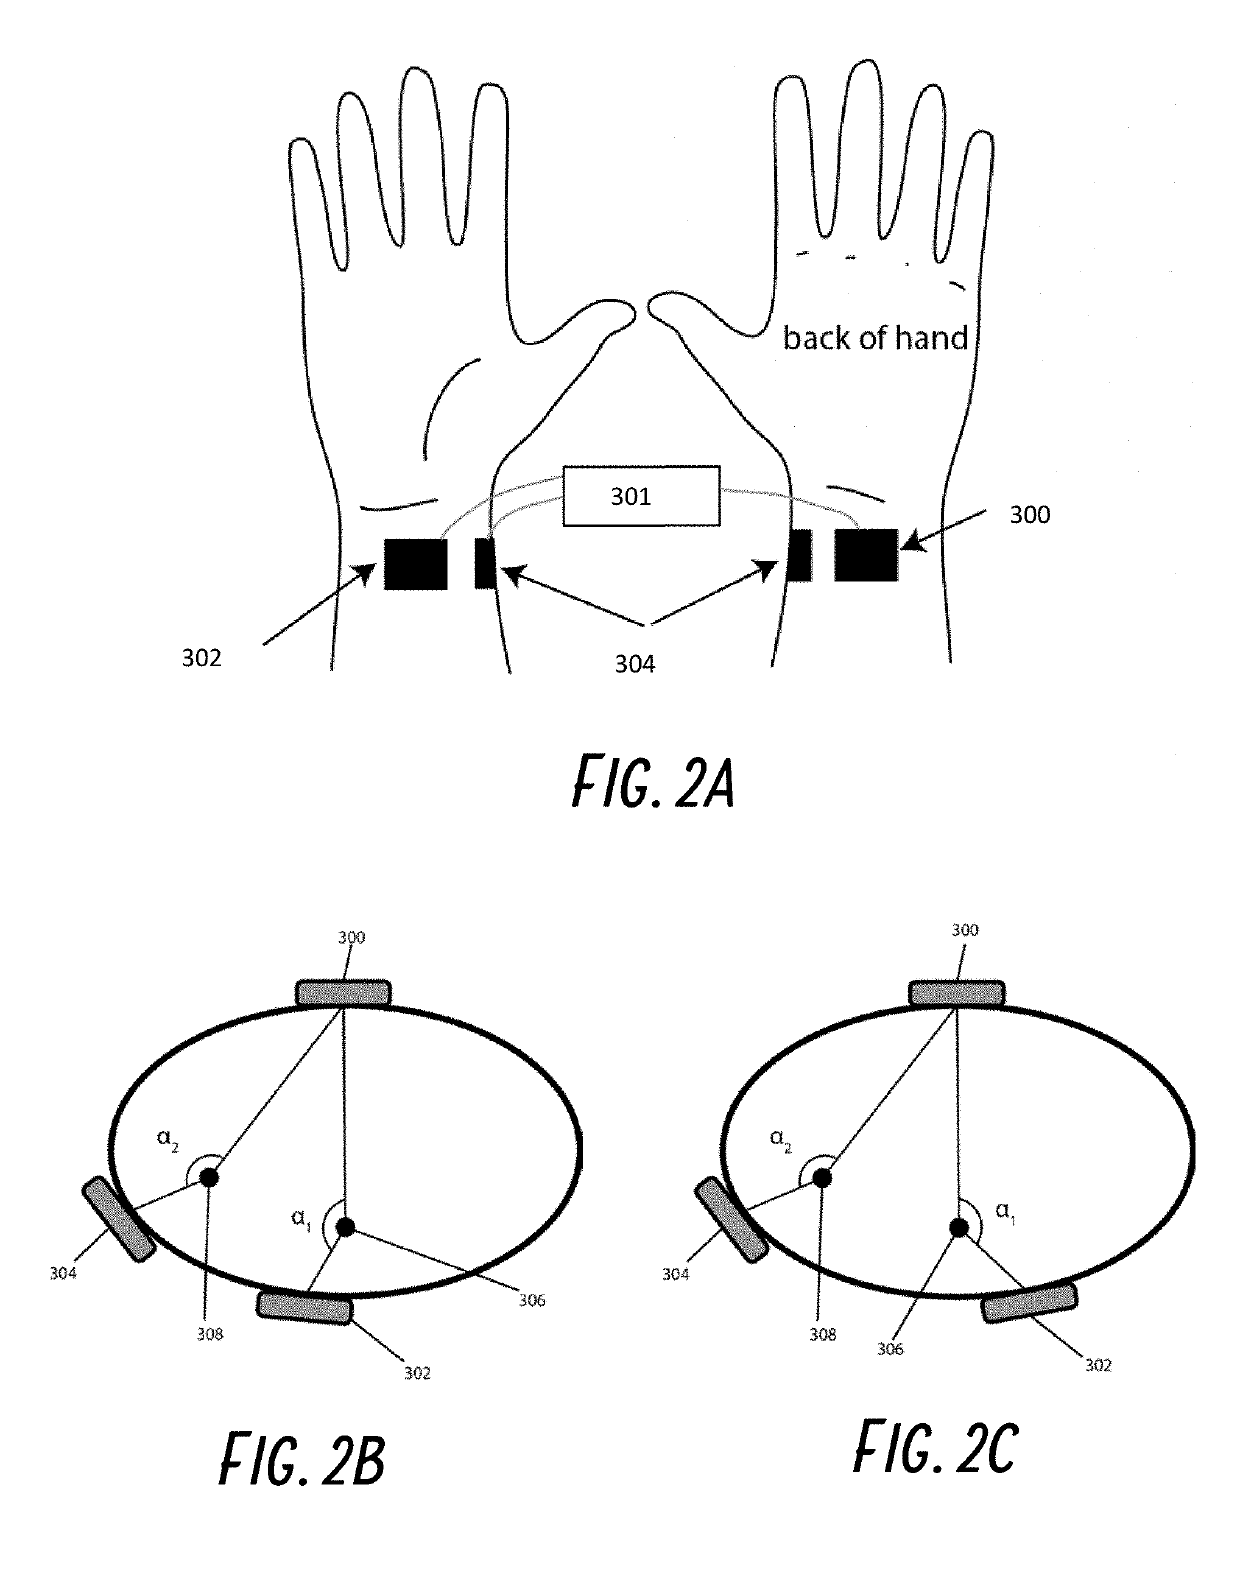 Dry electrodes for transcutaneous nerve stimulation